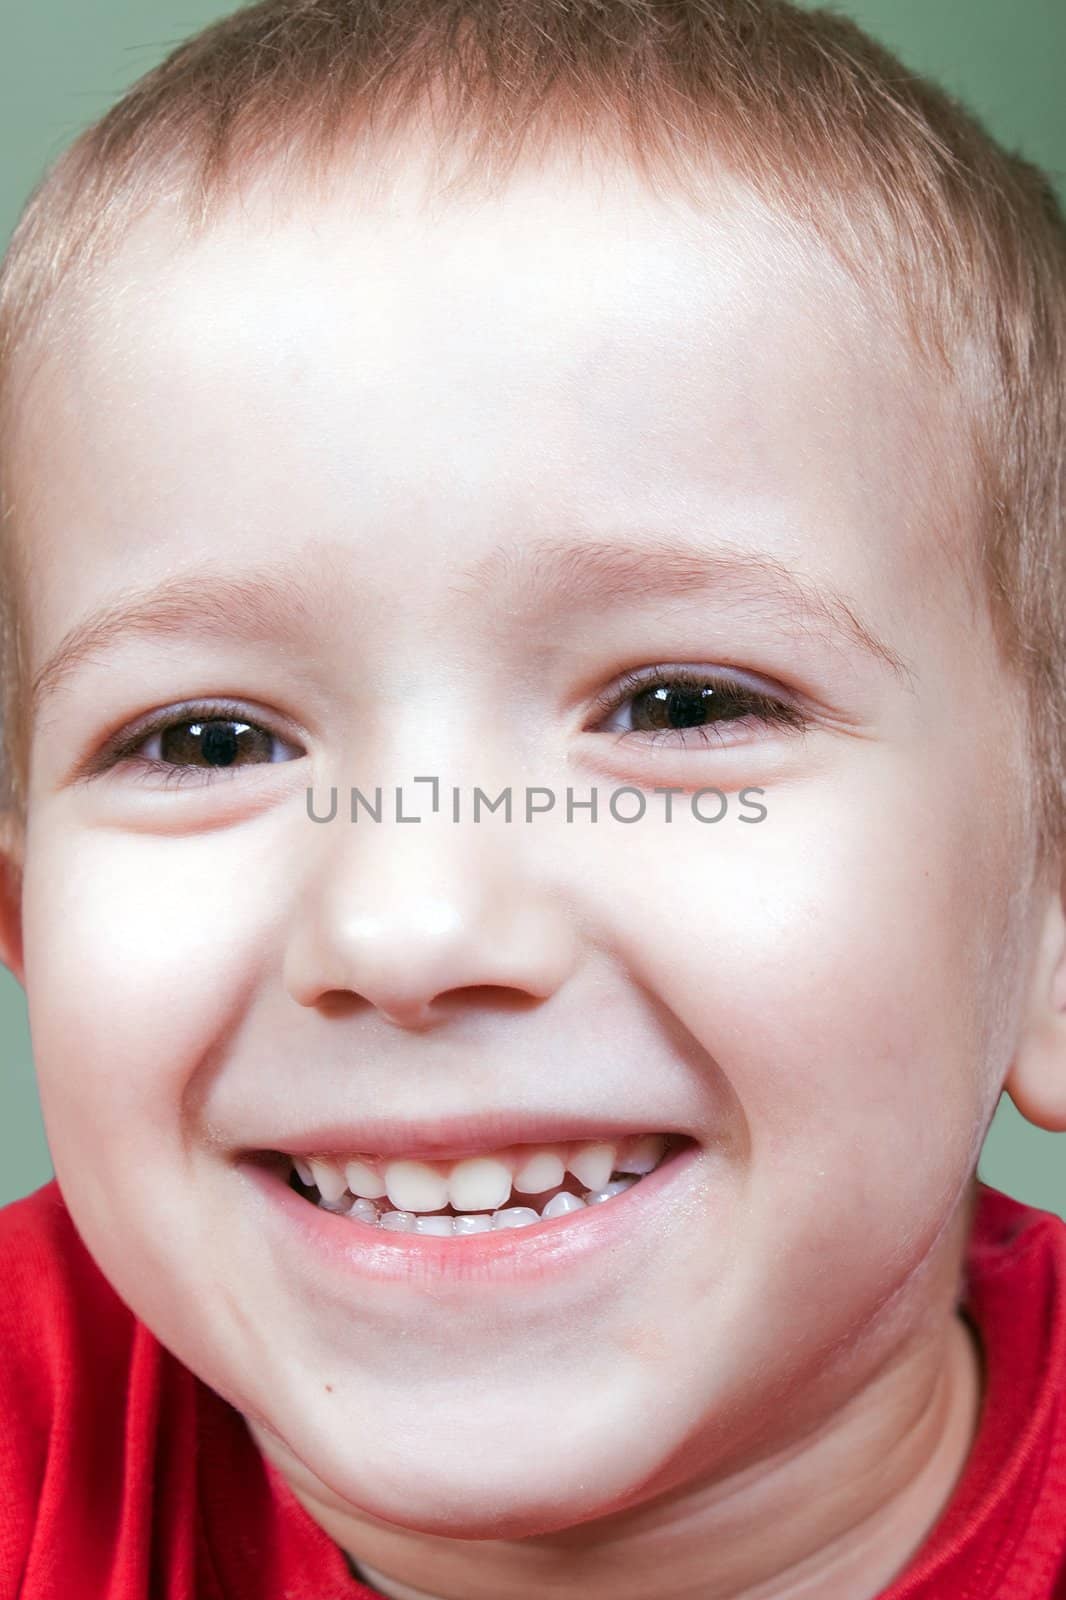 Little child smiling for happiness and fun